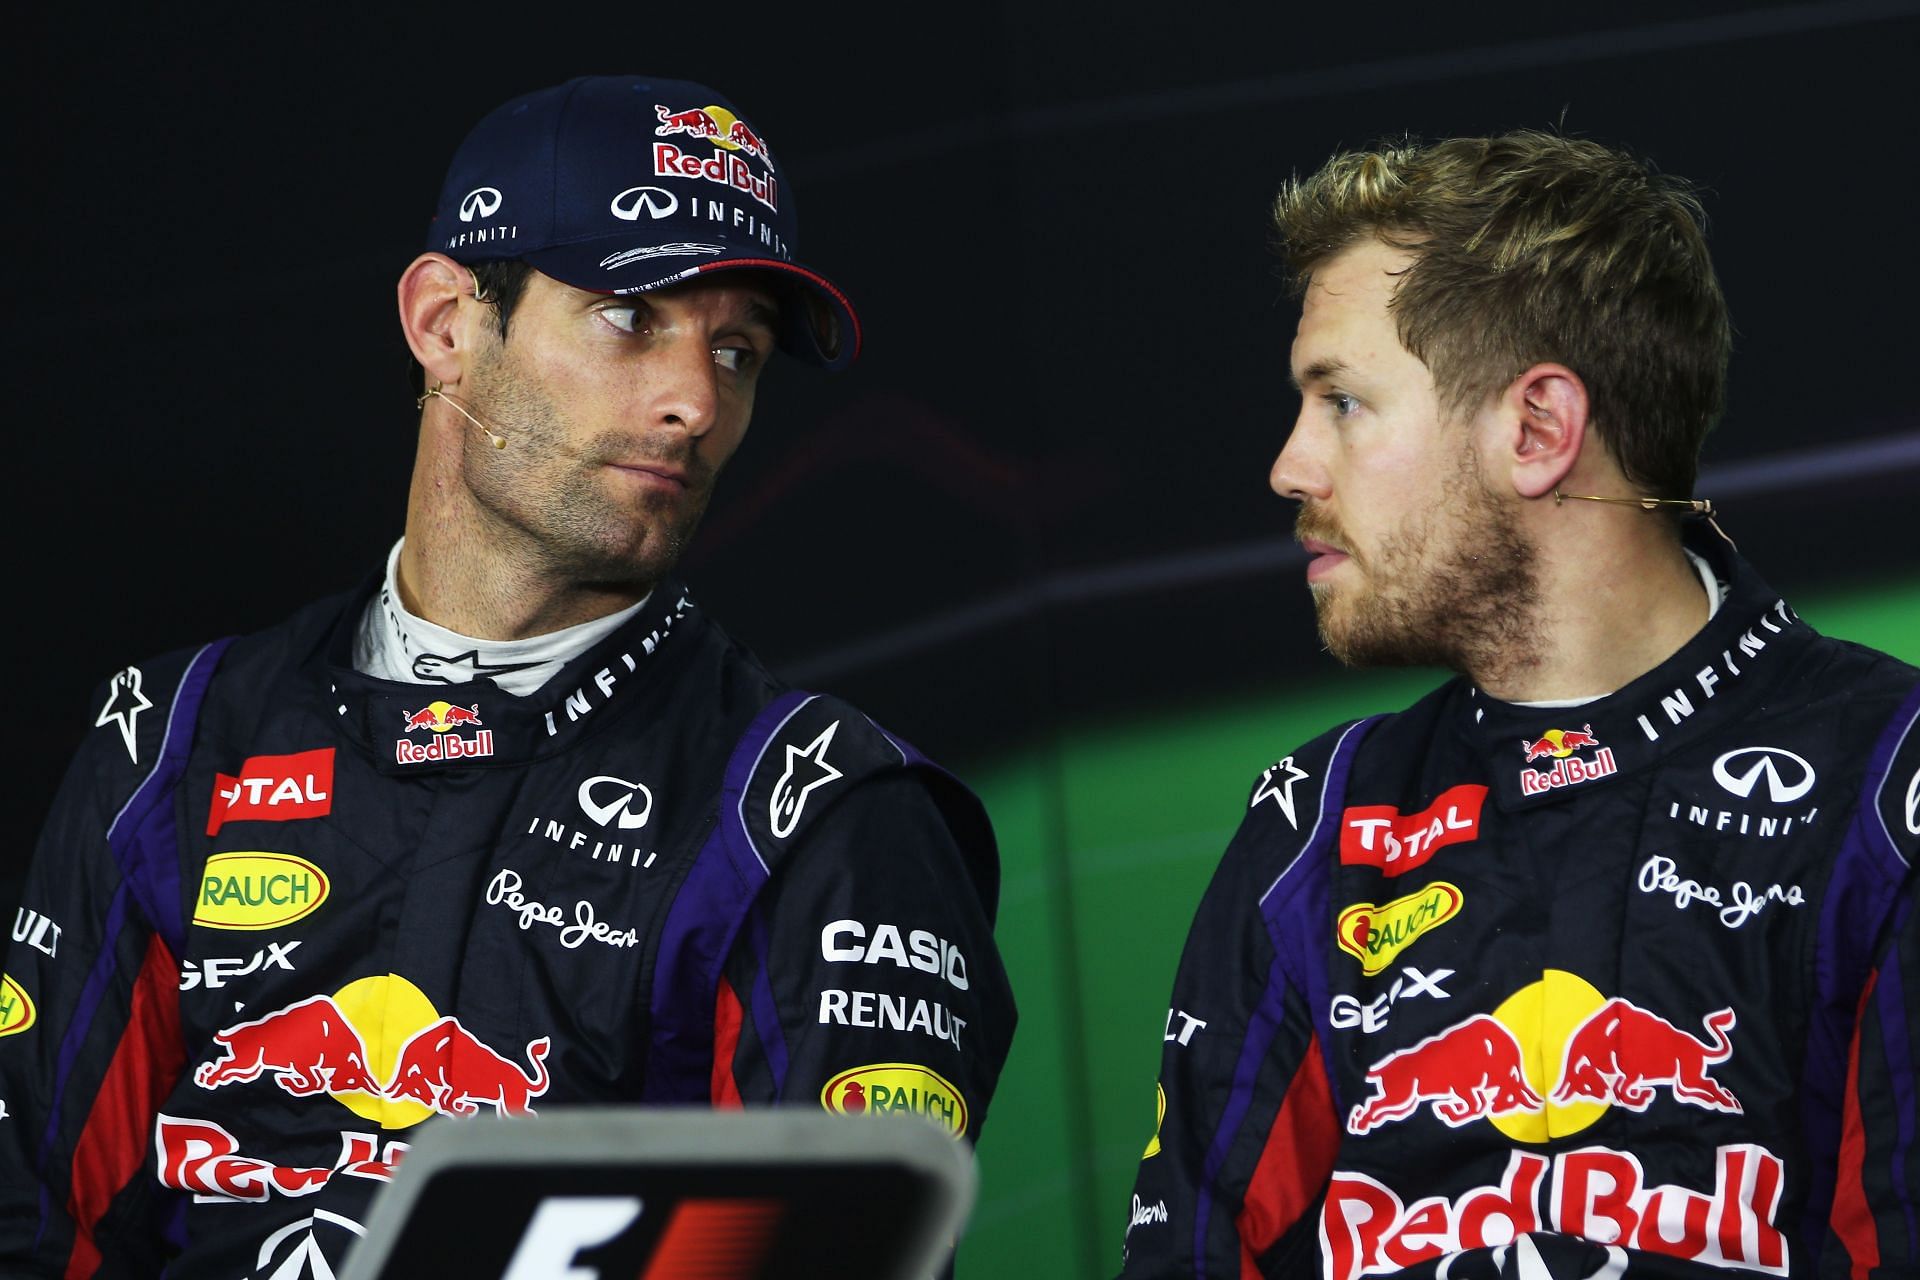 Mark Webber (left) and Sebastian Vettel (right) share a moment as Red Bull teammates during the 2010 F1 Brazilian GP. (Photo by Mark Thompson/Getty Images)